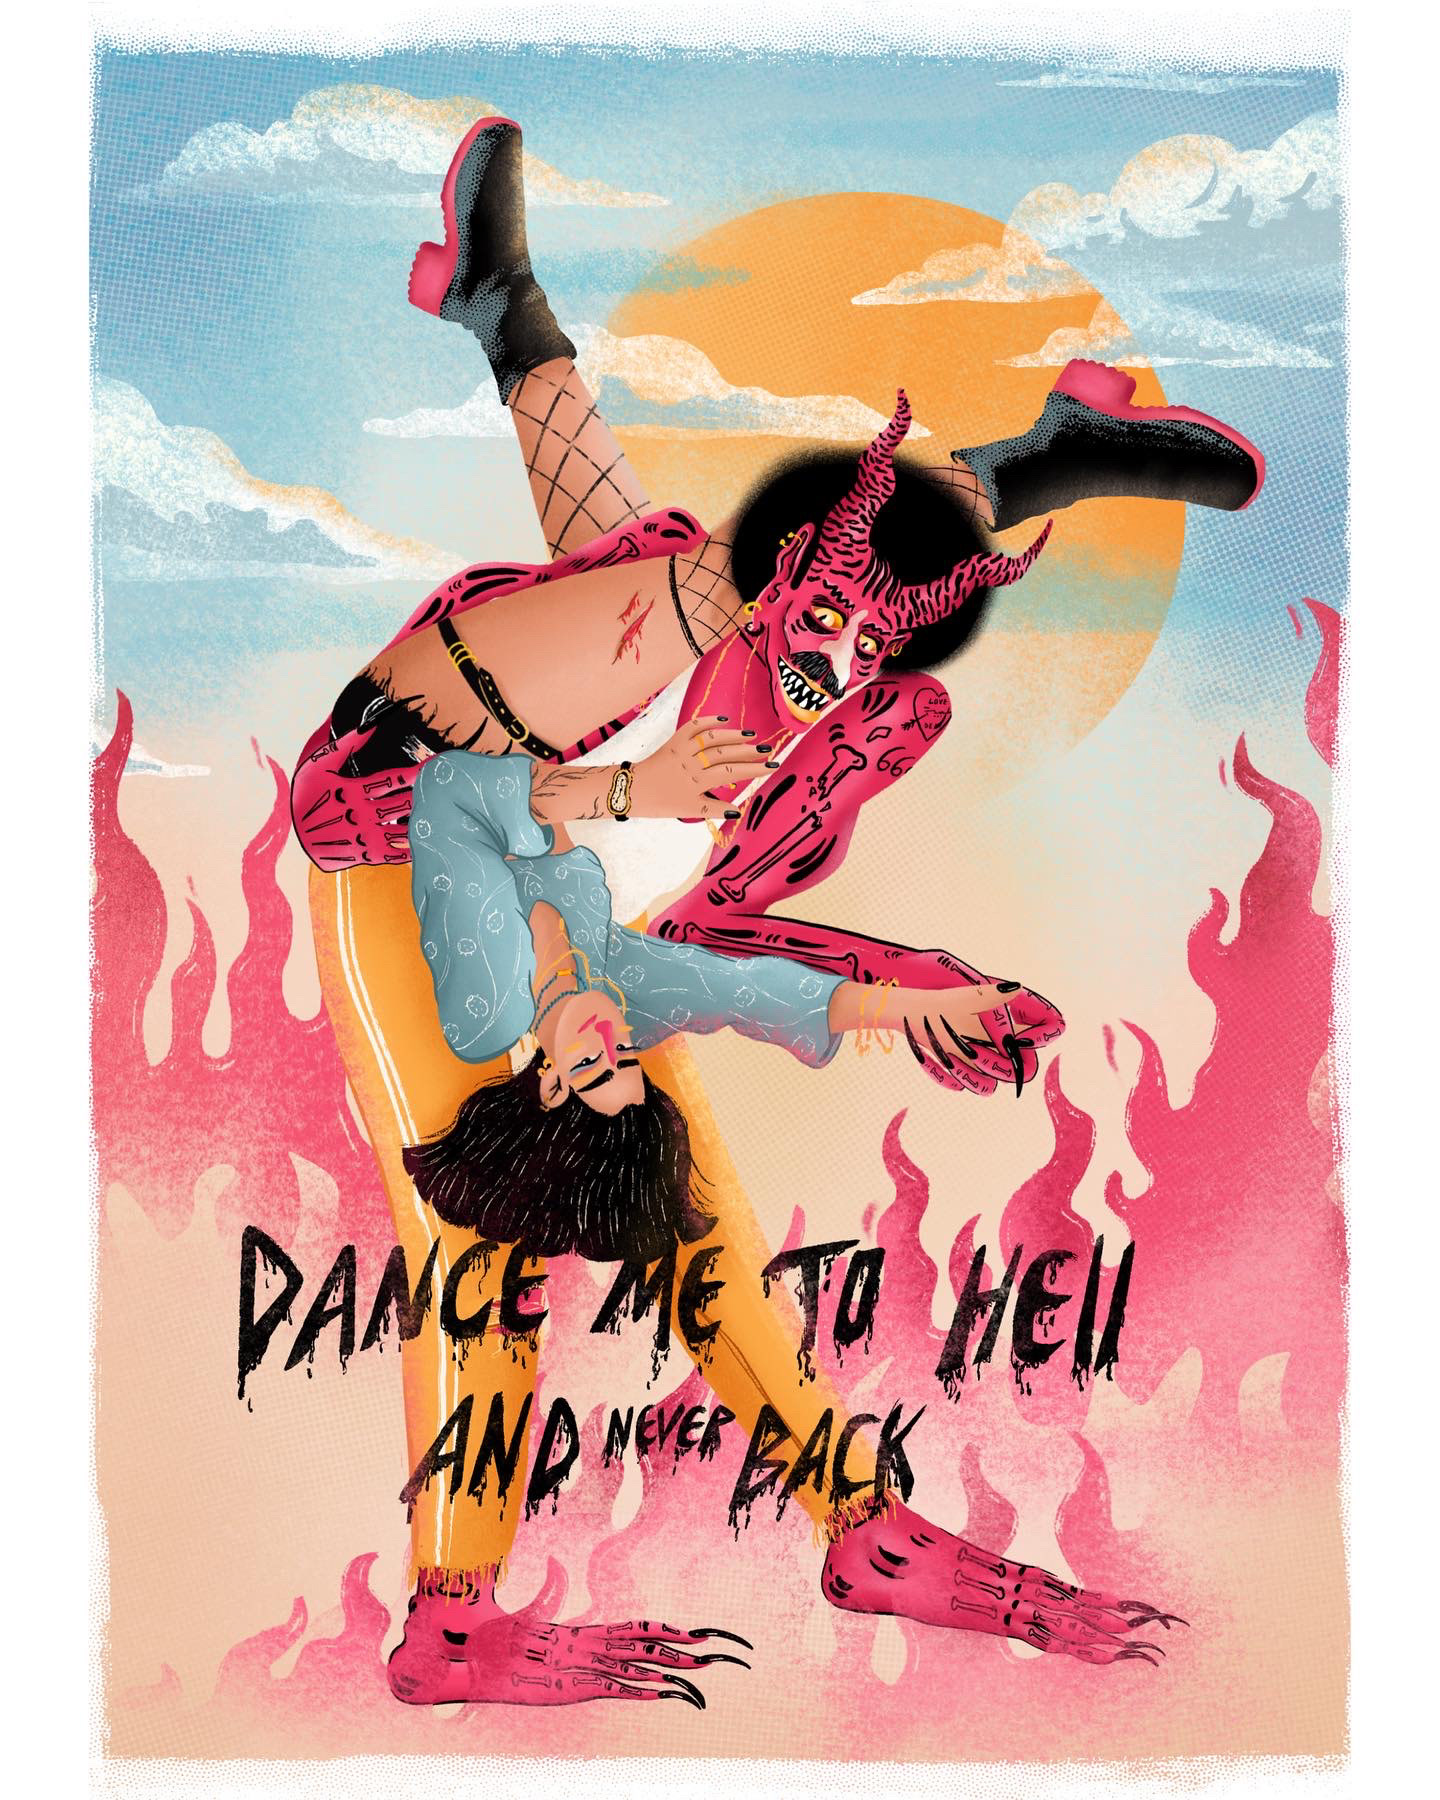 Dancing with the devil - illustration by Assala CHOUK